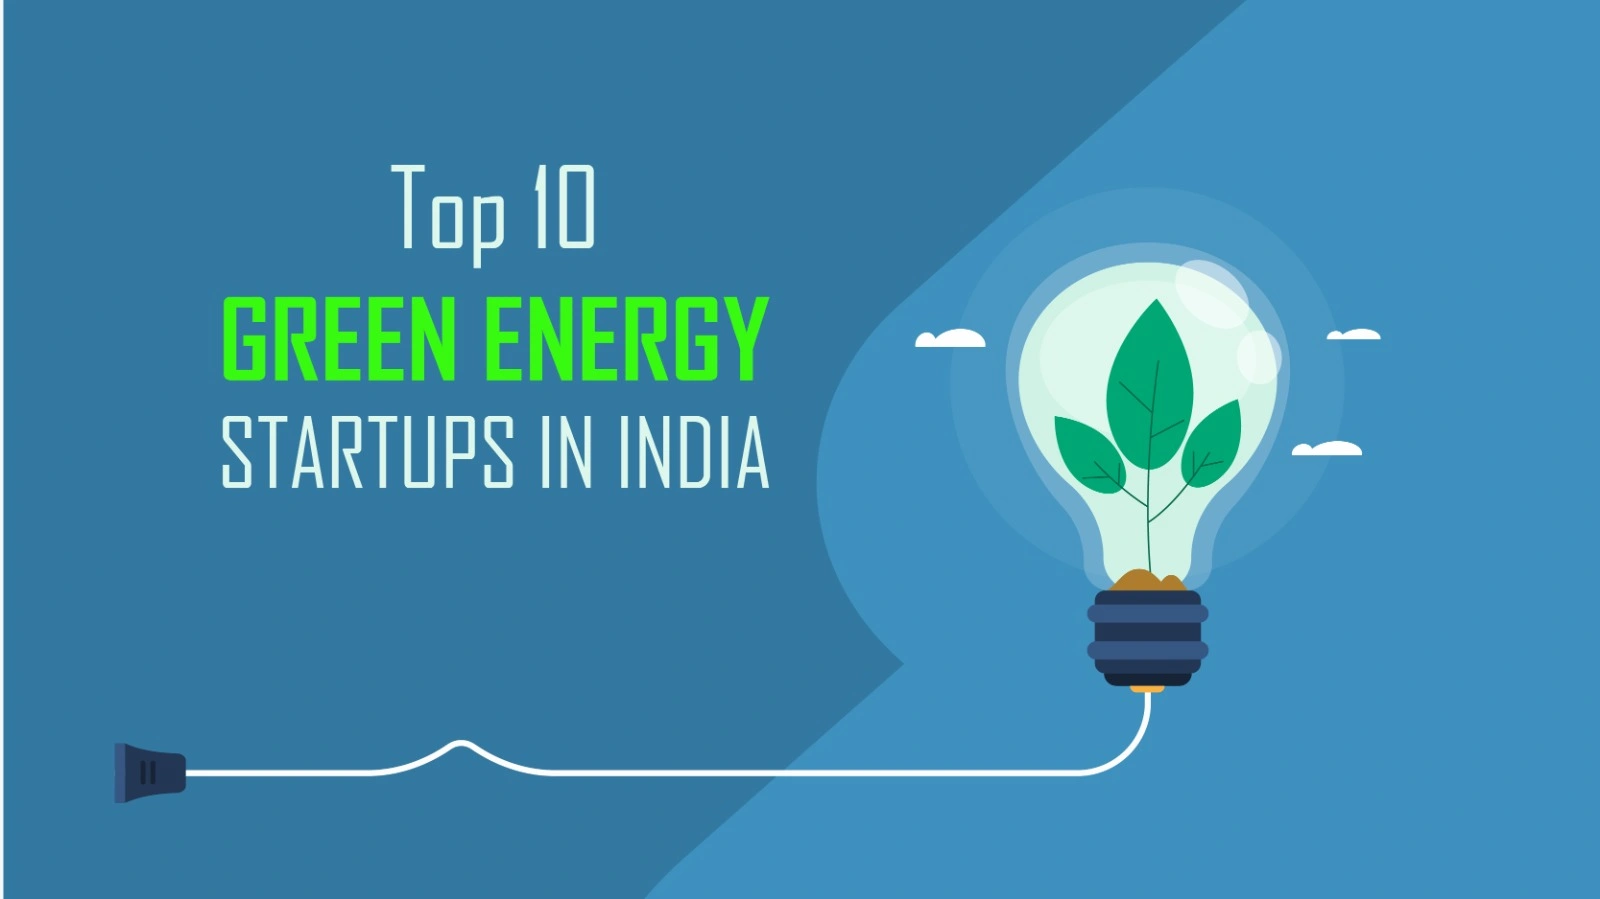 Top 10 Green Energy Startups in India